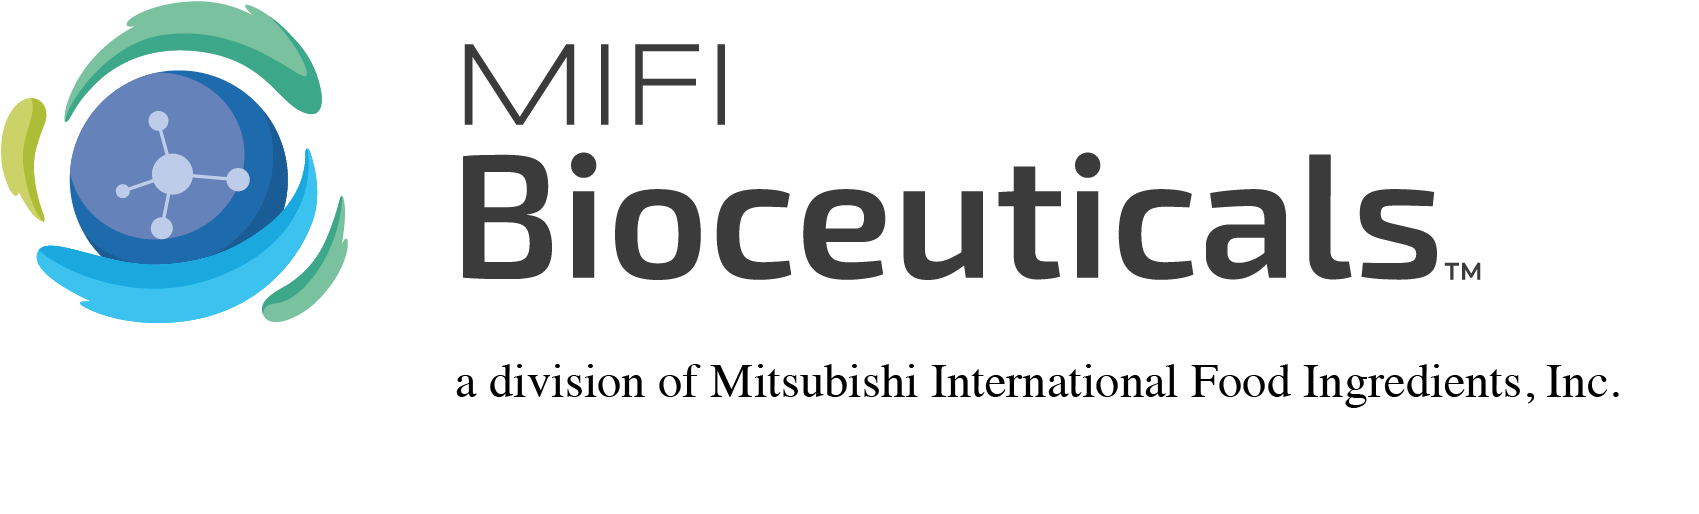 The brand launch of MIFI Bioceuticals™